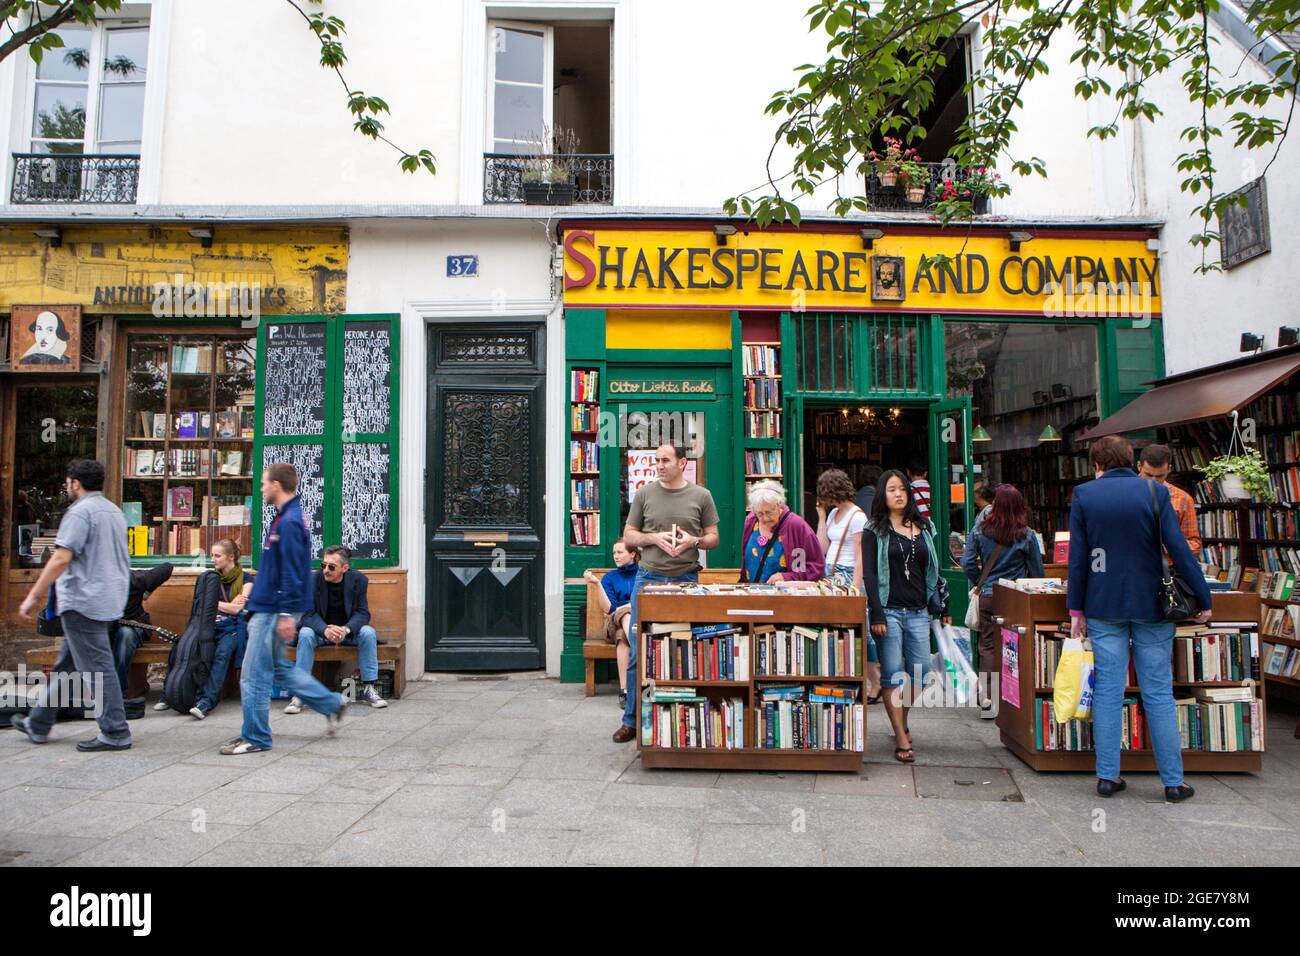 Librairie Shakespeare and Company, Paris, France Banque D'Images